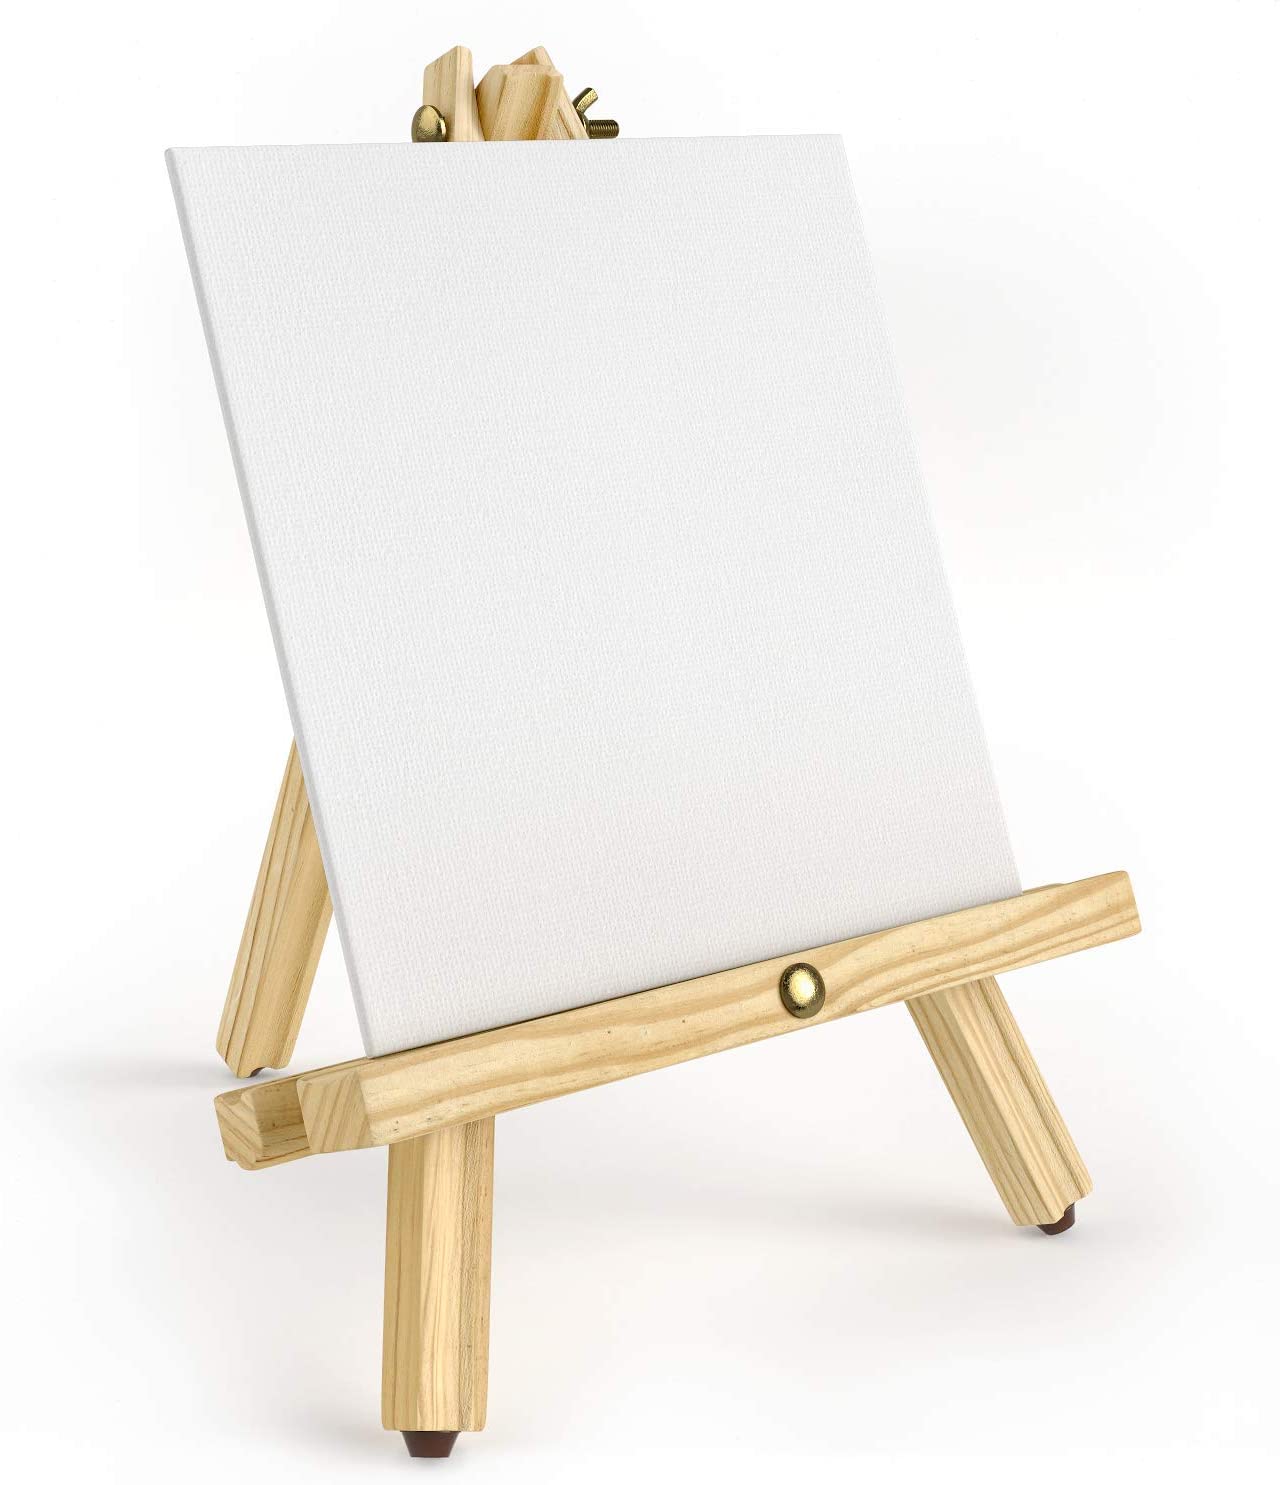 WOWOSS 12 Pack 5 Mini Wood Display Easel, Natural Wooden Tripod Holder  Stand for Displaying Small Canvases, Business Cards, Photos